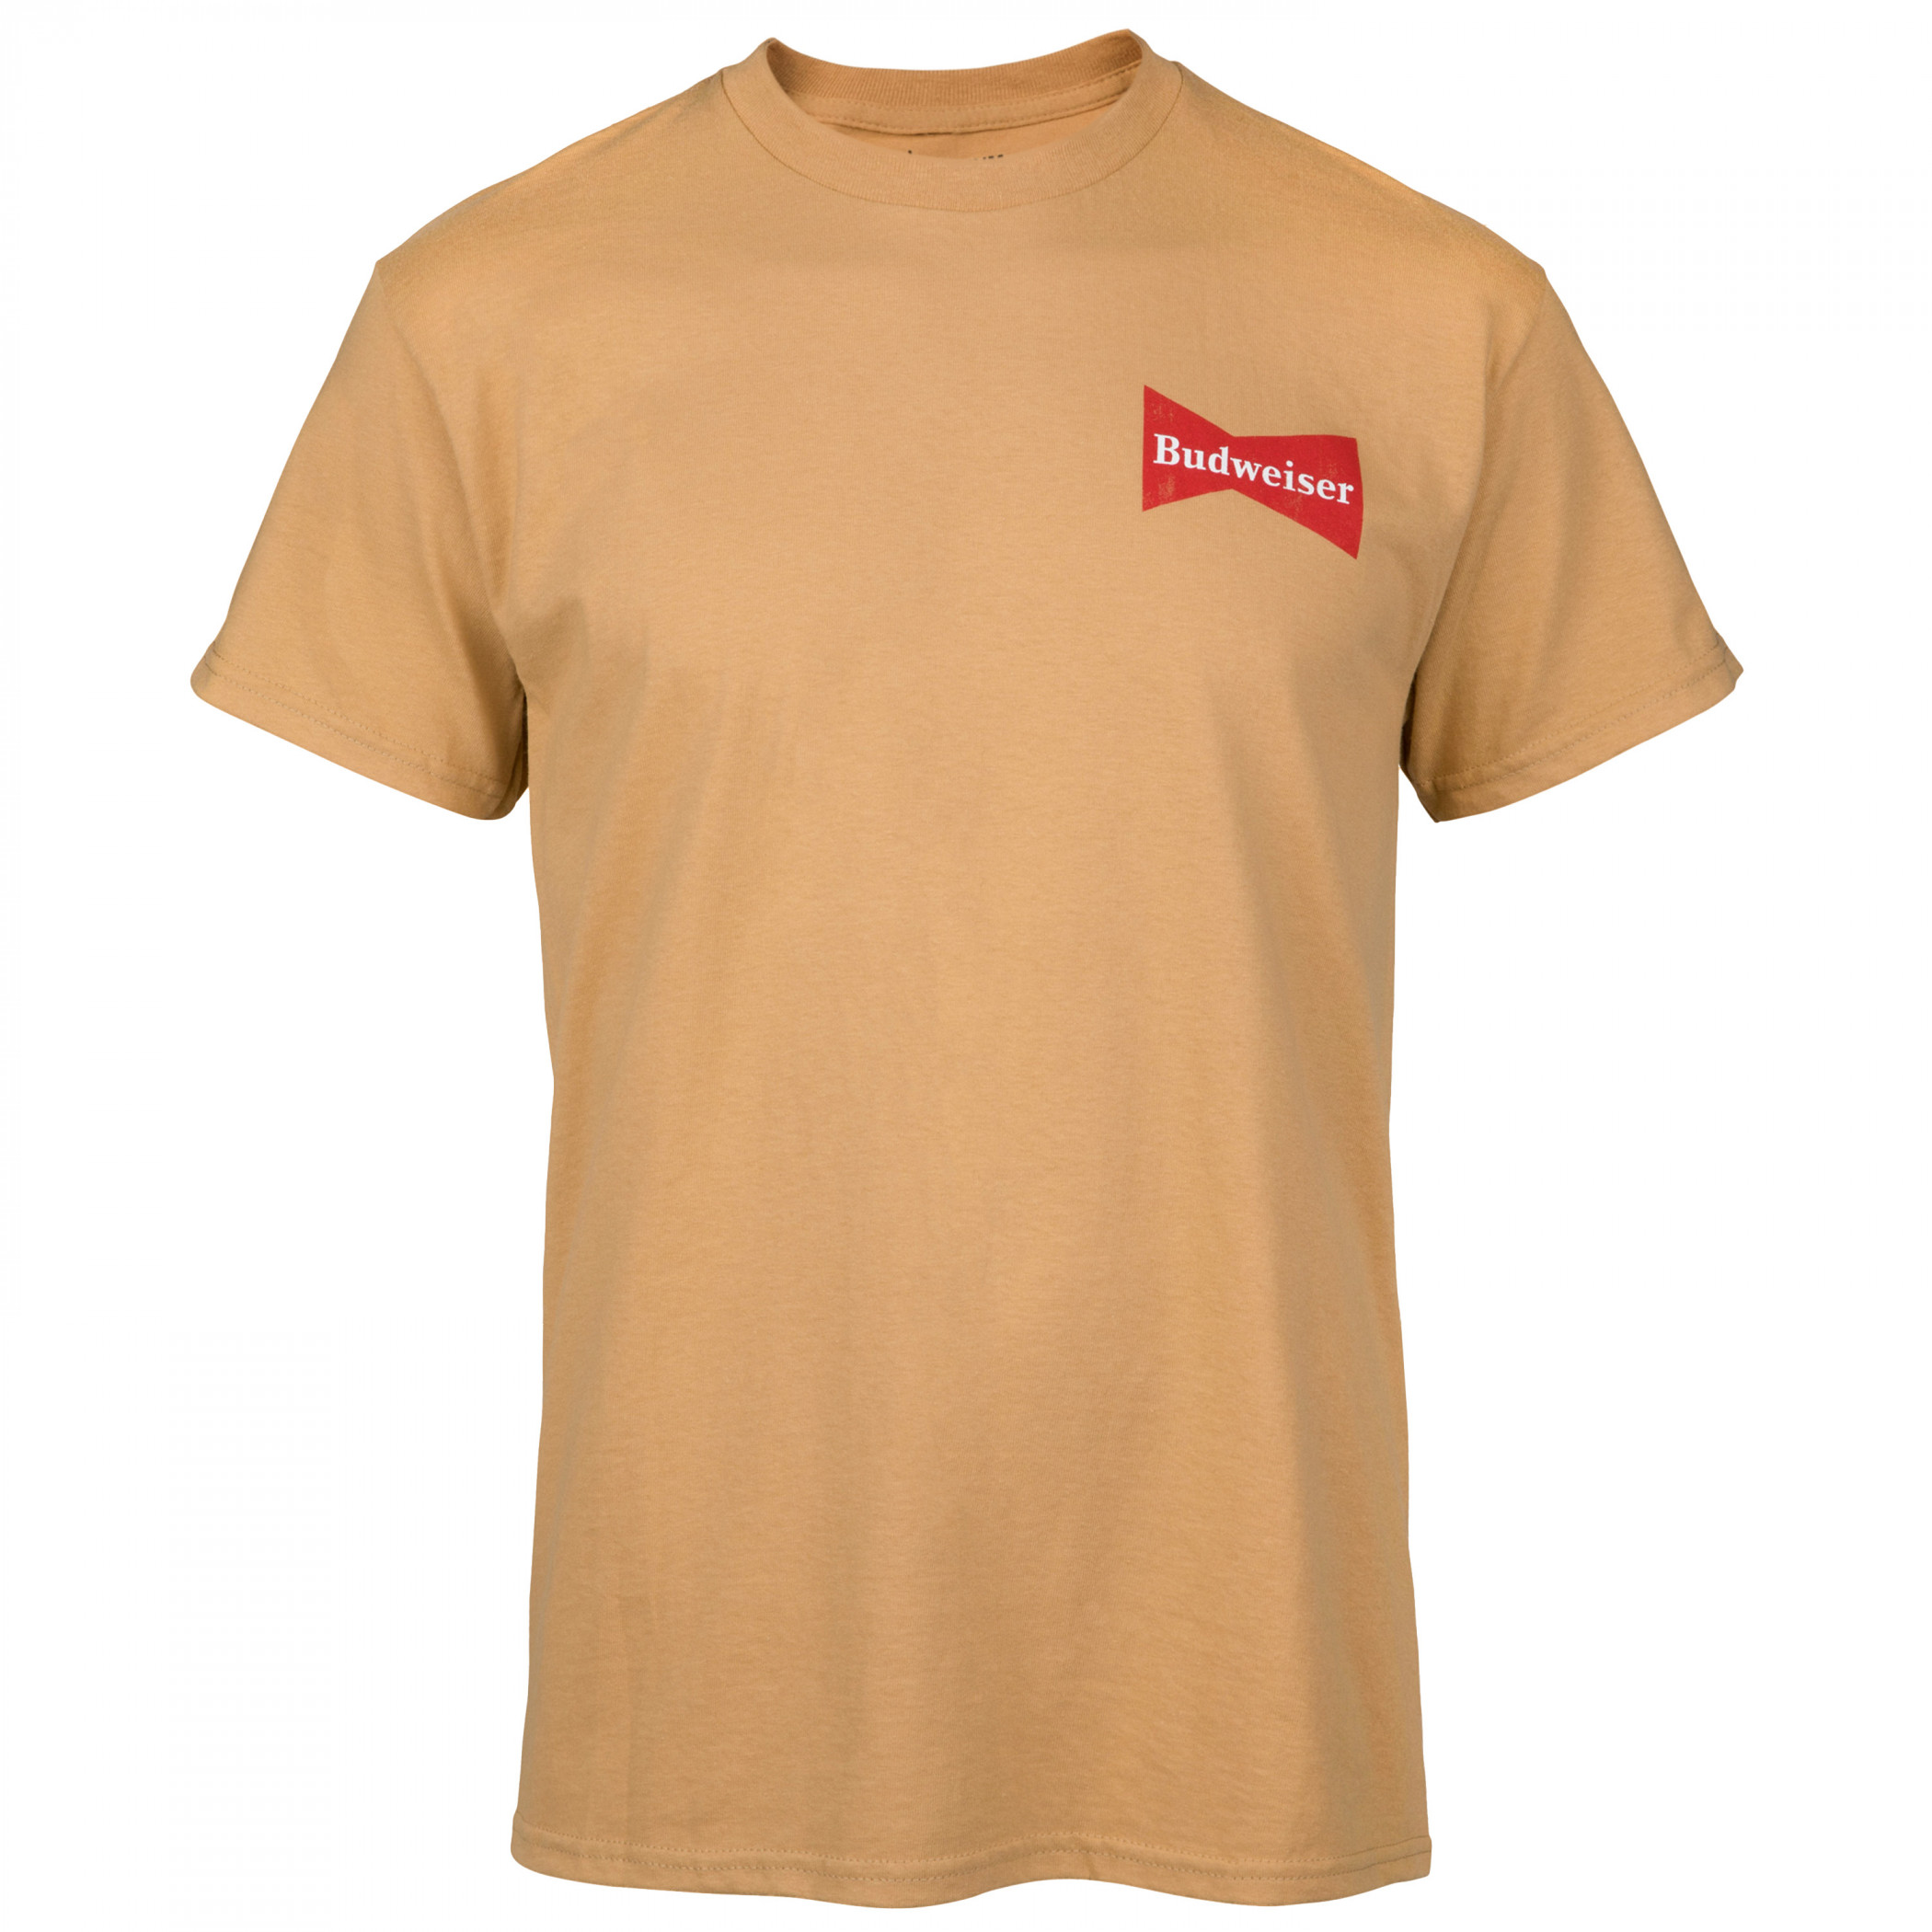 Budweiser King of Beers Retro Logo Front and Back Print T-Shirt